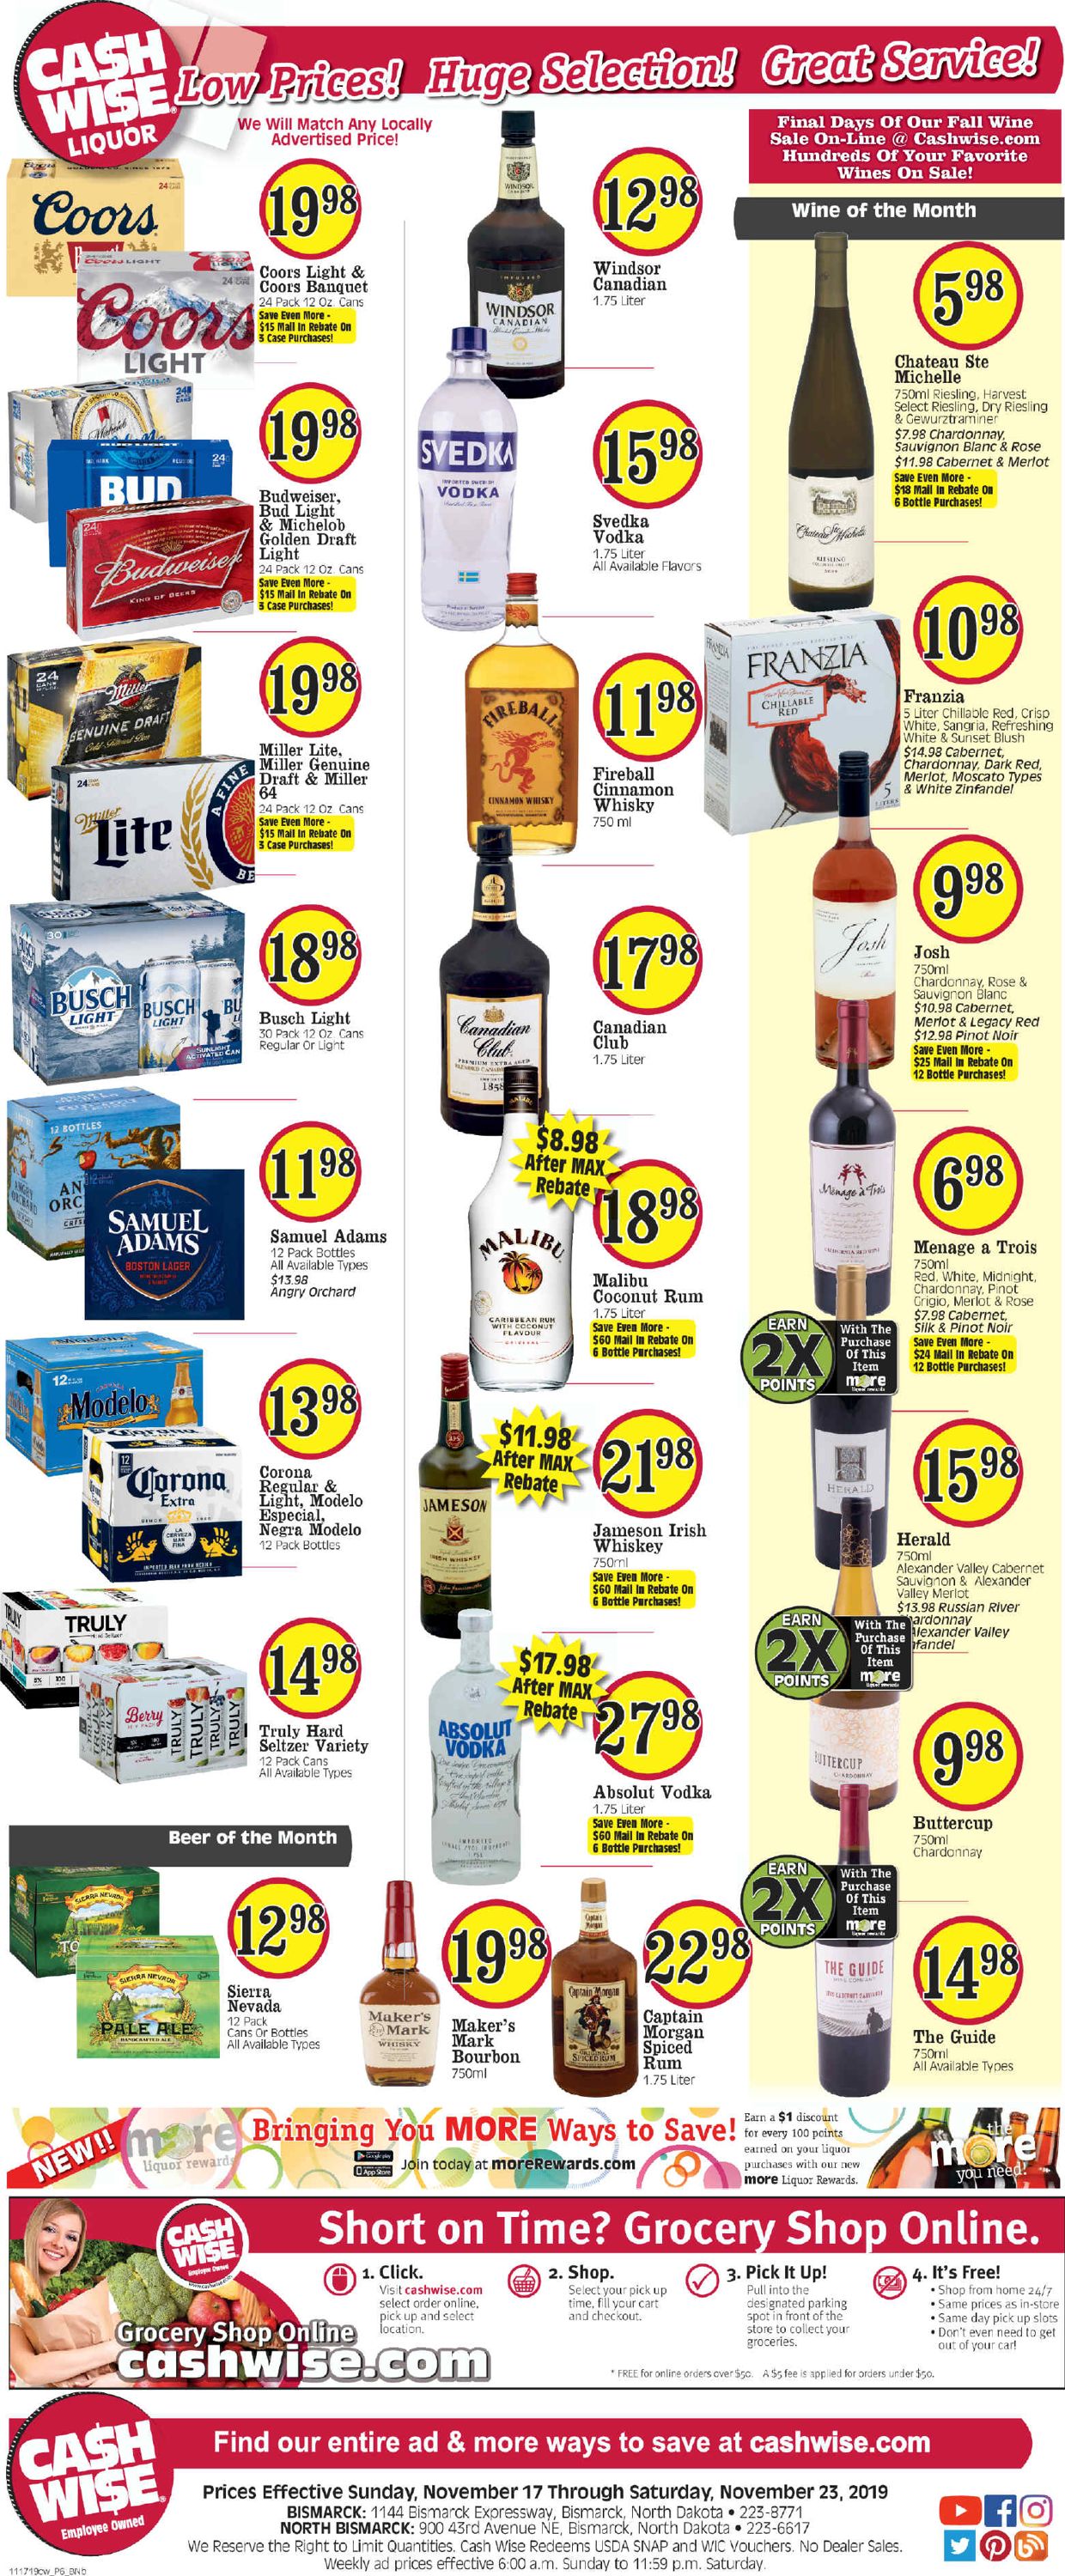 Cash Wise - Thanksgiving Ad 2019 Weekly Ad Circular - valid 11/20-11/26/2019 (Page 6)